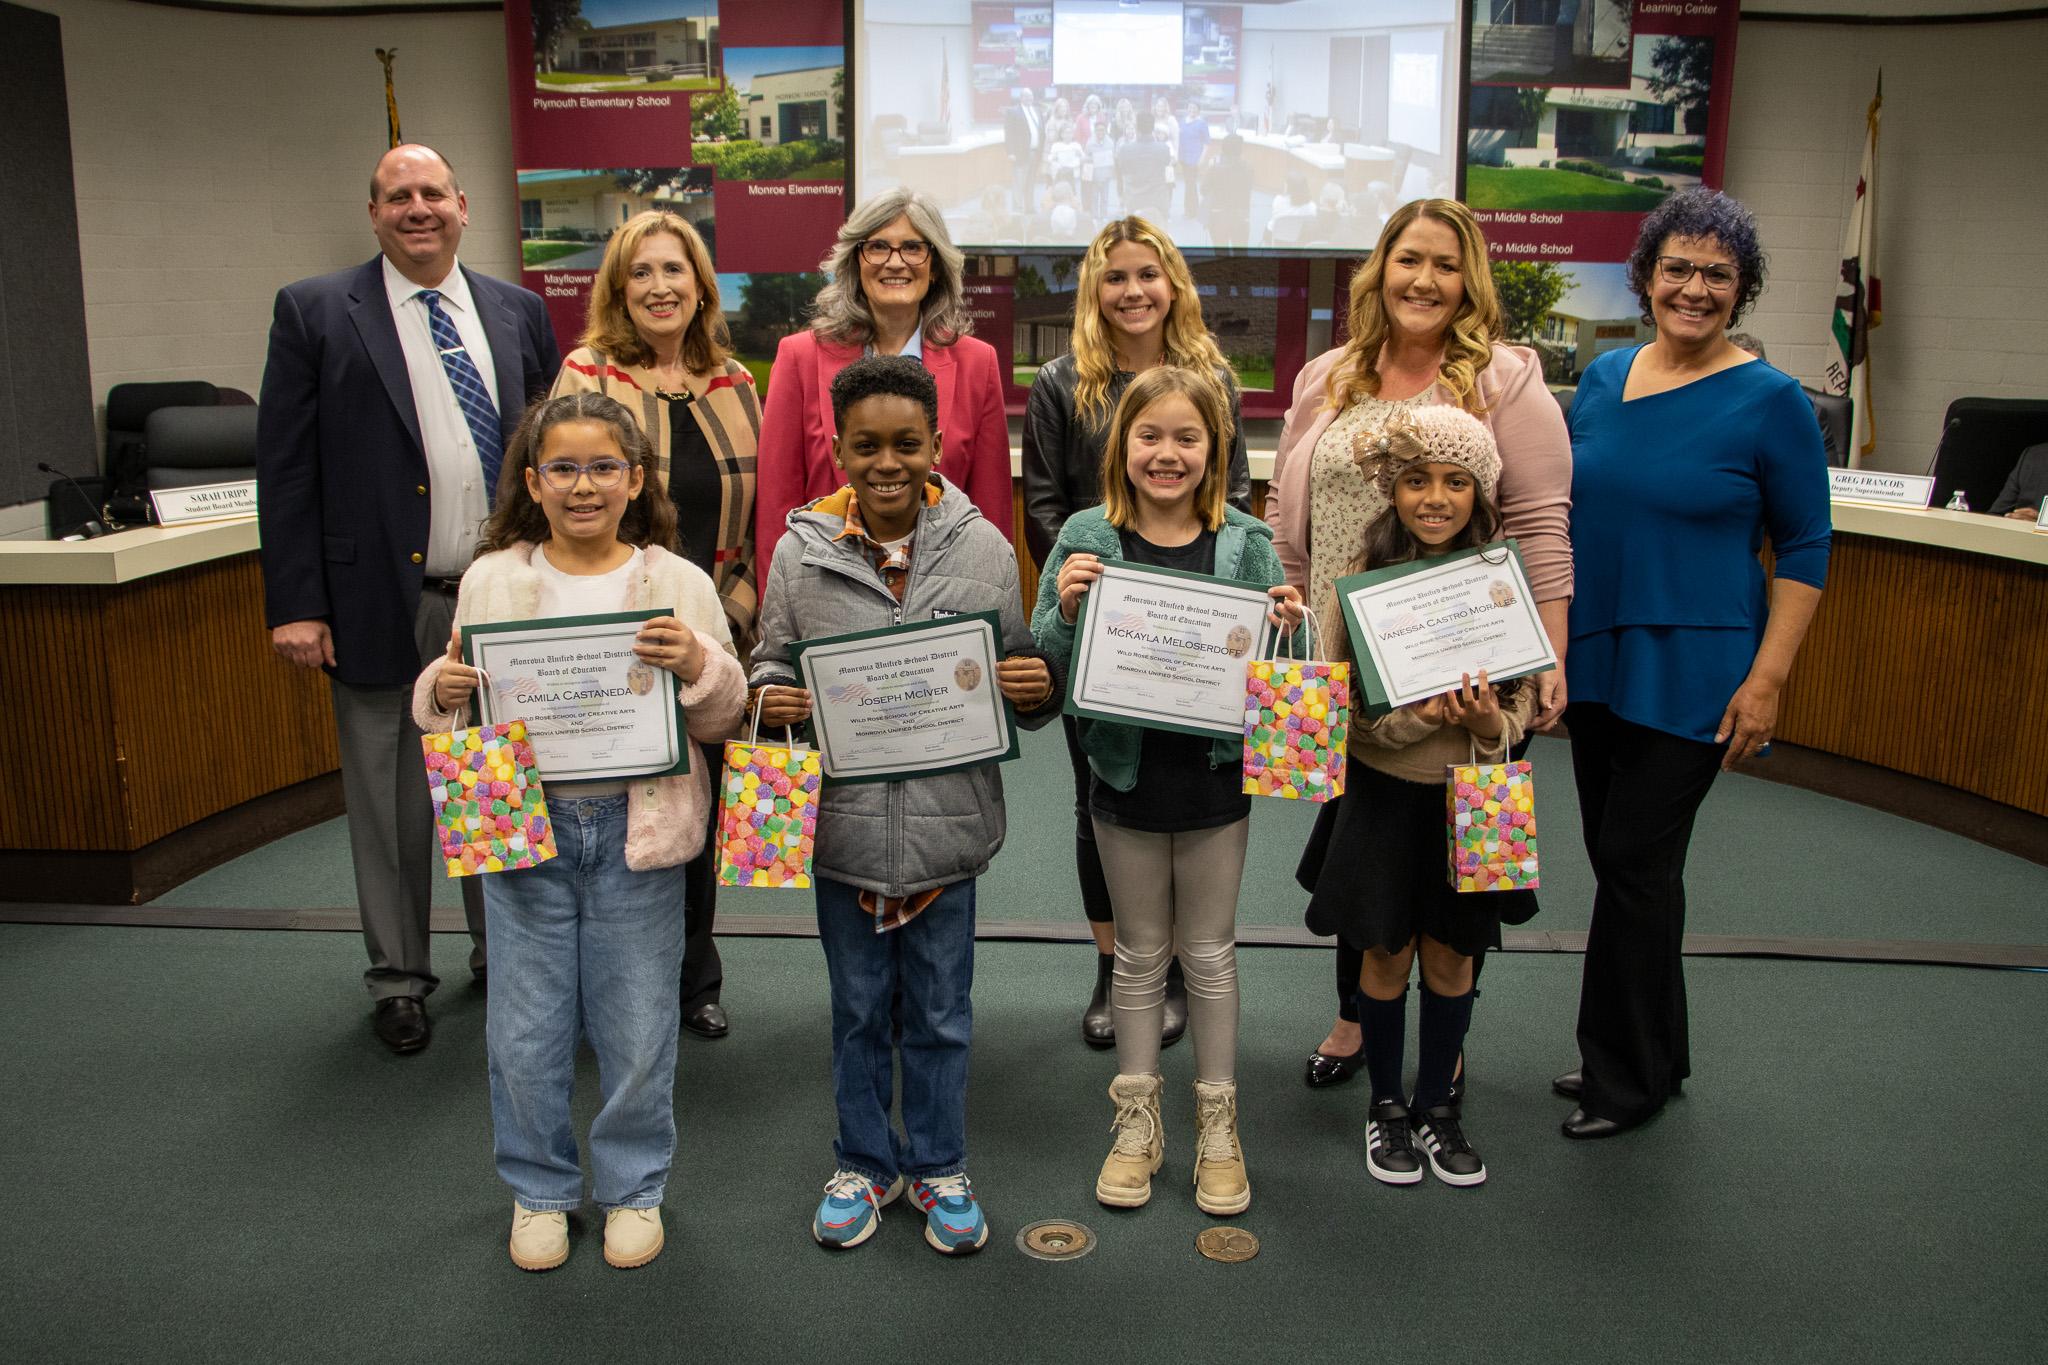 At its March meetings, the Monrovia Unified School District Board of Education invited students from Wild Rose School of Creative Arts and Mayflower Elementary to lead the Pledge of Allegiance.